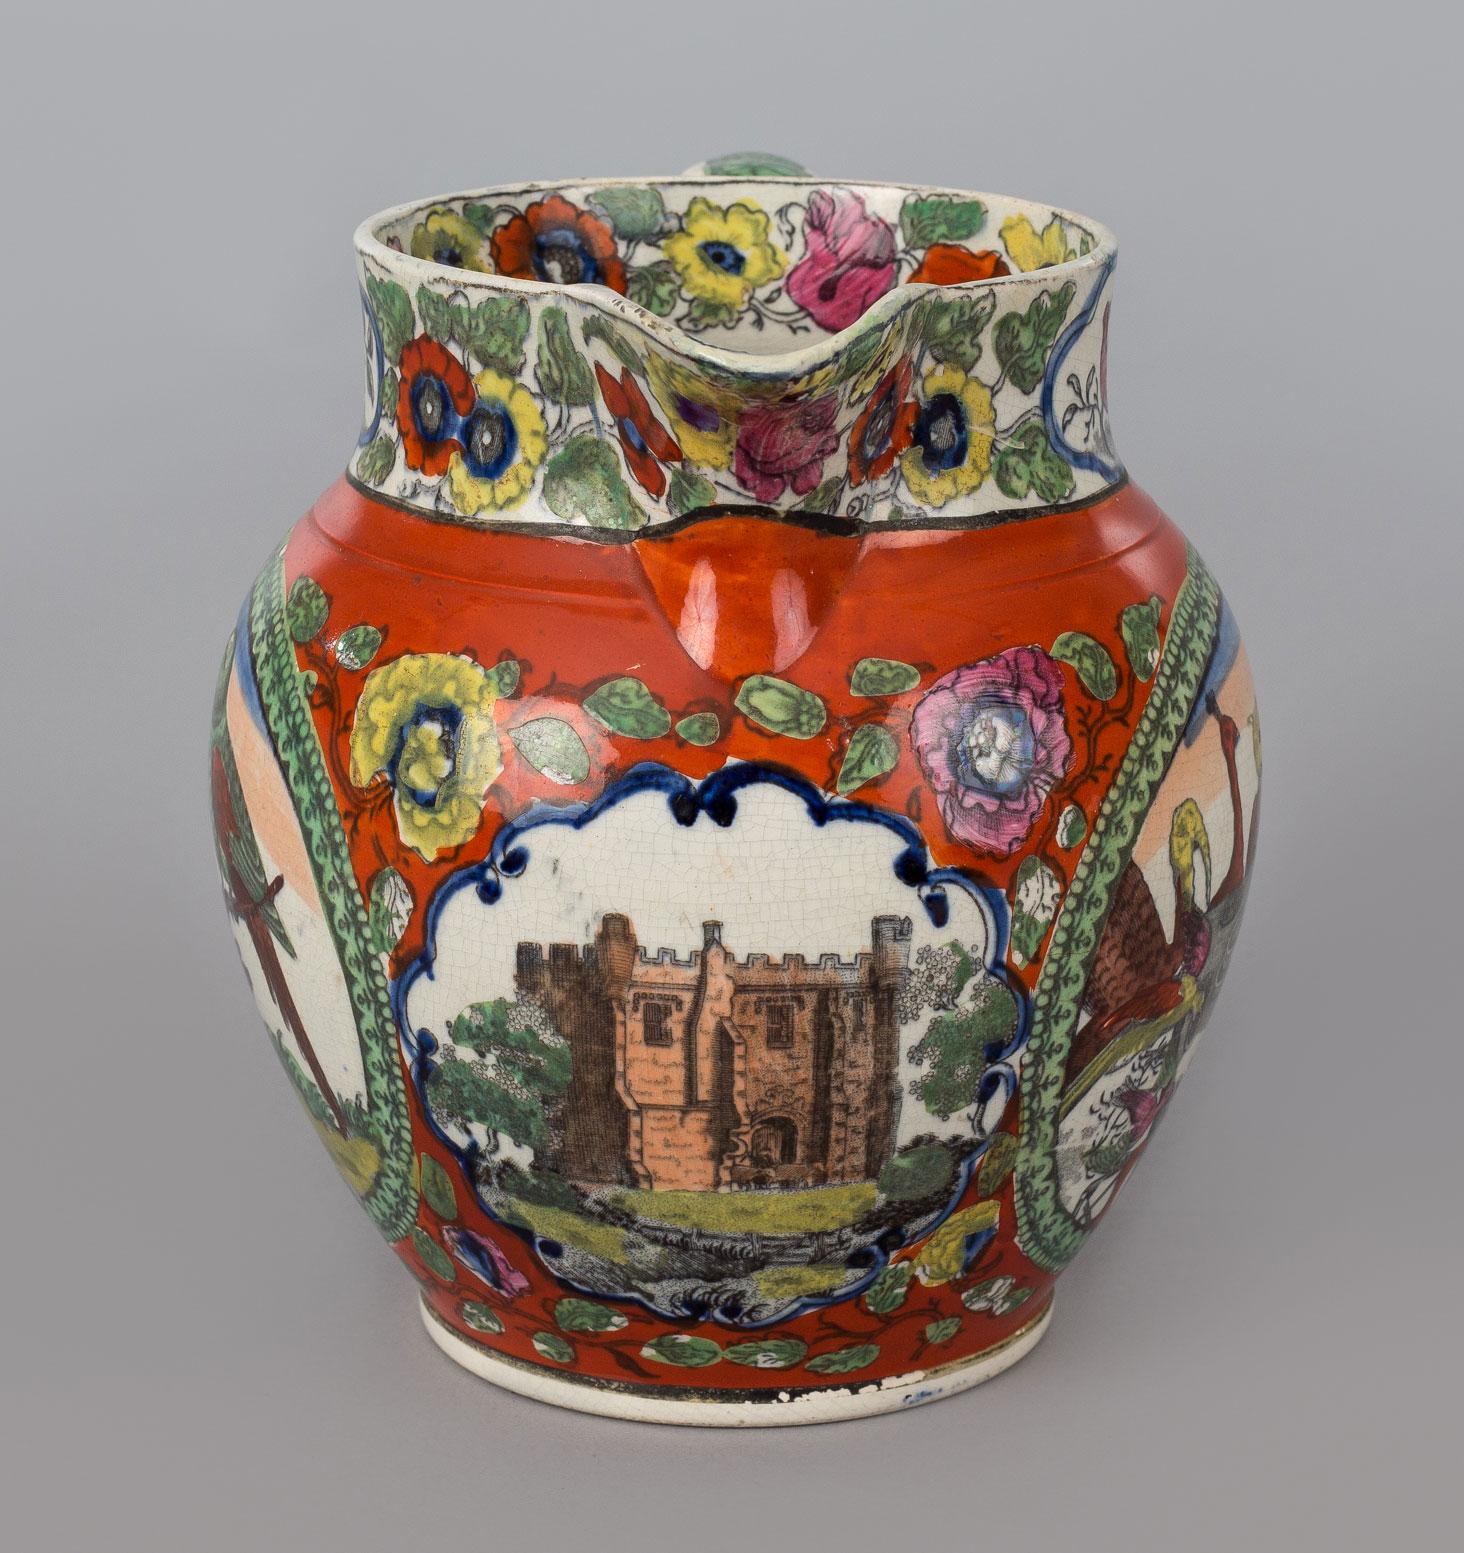 An unusual, charming and delightful small Staffordshire polychrome creamware jug decorated with two oval panels; one with an owl, swan, turkey, peacock, stork, birds eating at a table, the back panel depicts two parrots perched on a tree trunk. The